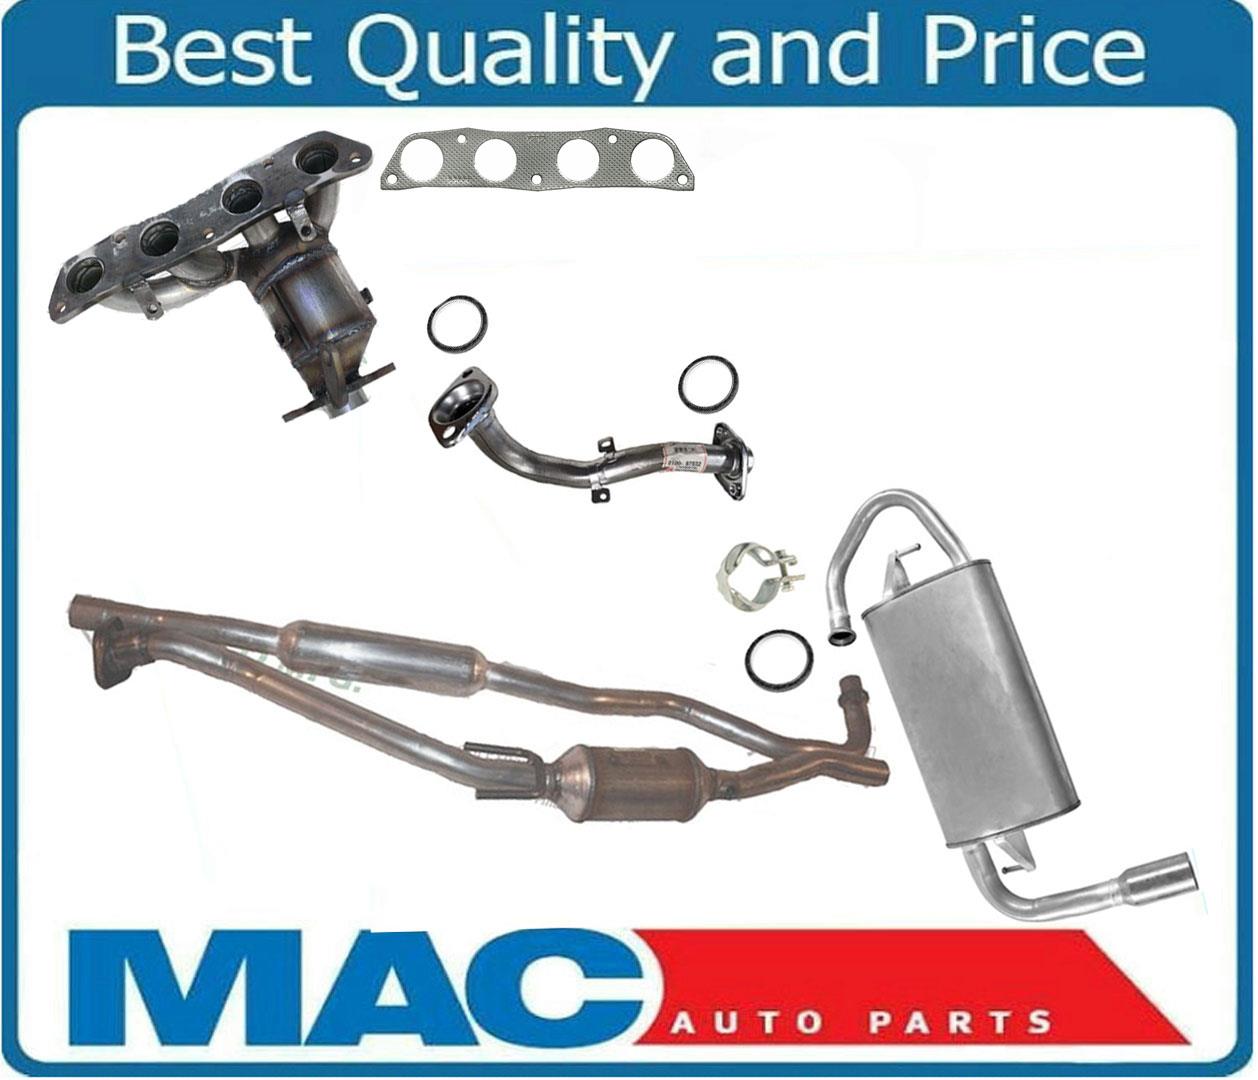 Full Exhaust System For Pontiac Vibe 2003-2006 1.8L ALL WHEEL DRIVE | eBay